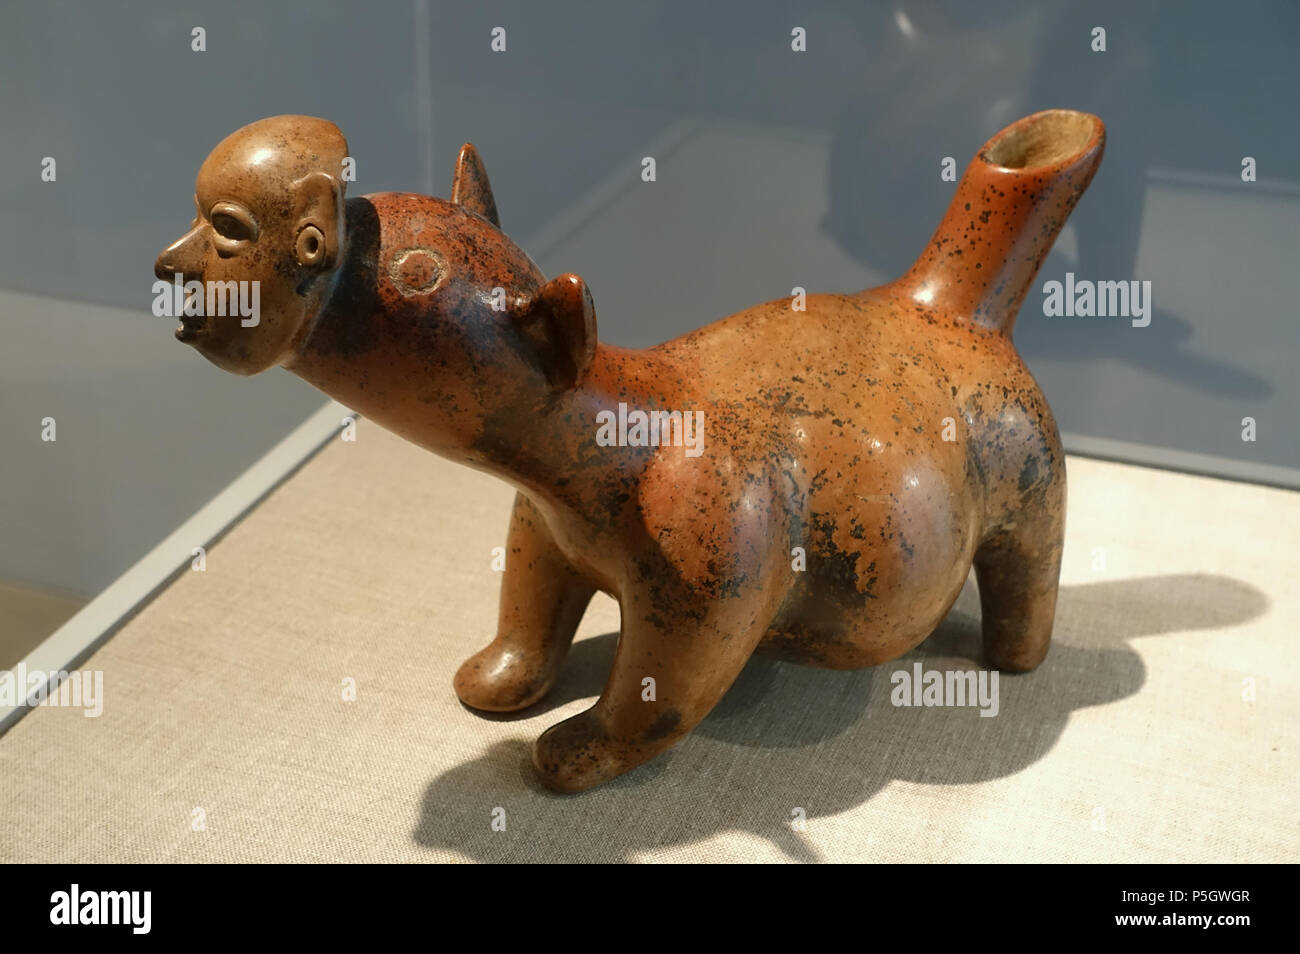 N/A. English: Exhibit in the Dallas Museum of Art, Dallas, Texas, USA. 7 May 2017, 15:22:41. Daderot 459 Dog with human mask, Colima state, Late Formative period, 100 BC to 200 AD, ceramic - Dallas Museum of Art - DSC04609 Stock Photo